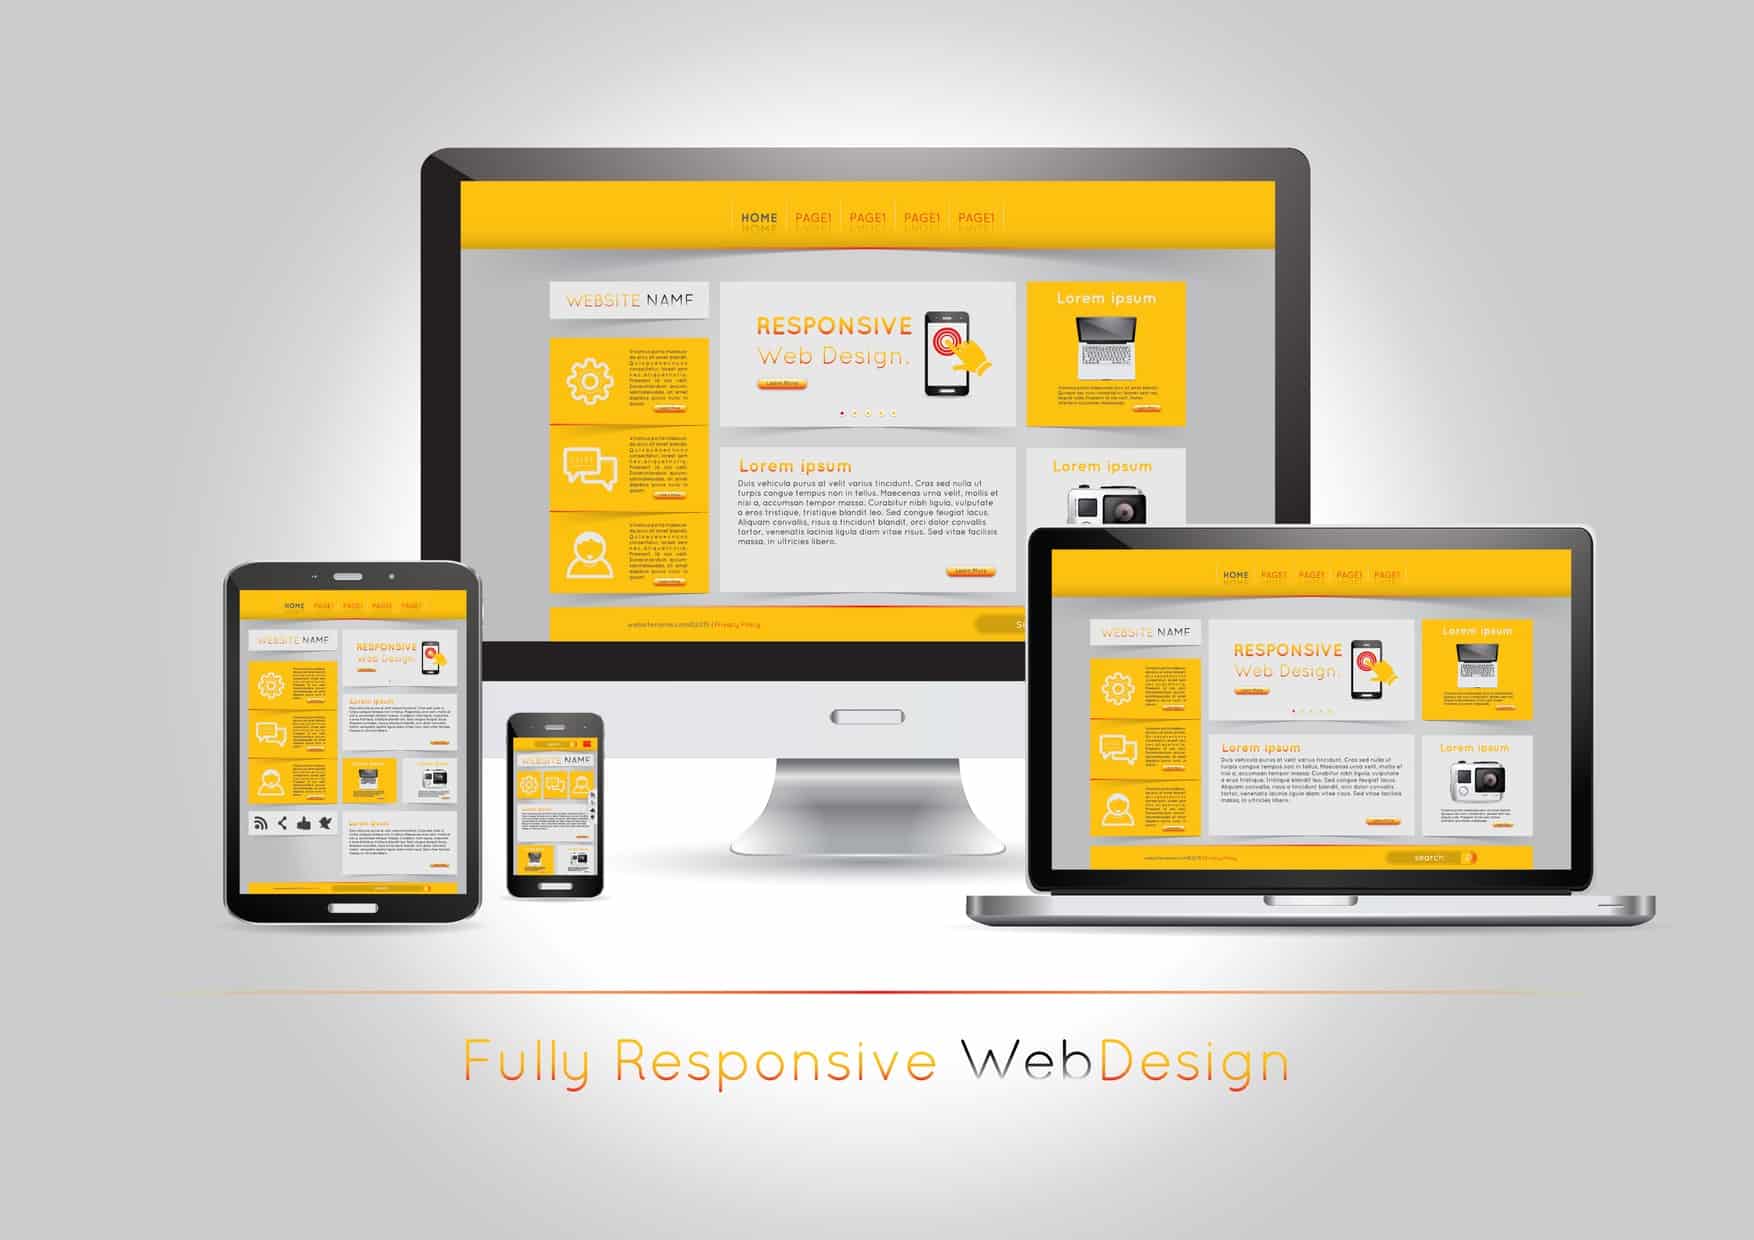 this picture shows a fully responsive website design